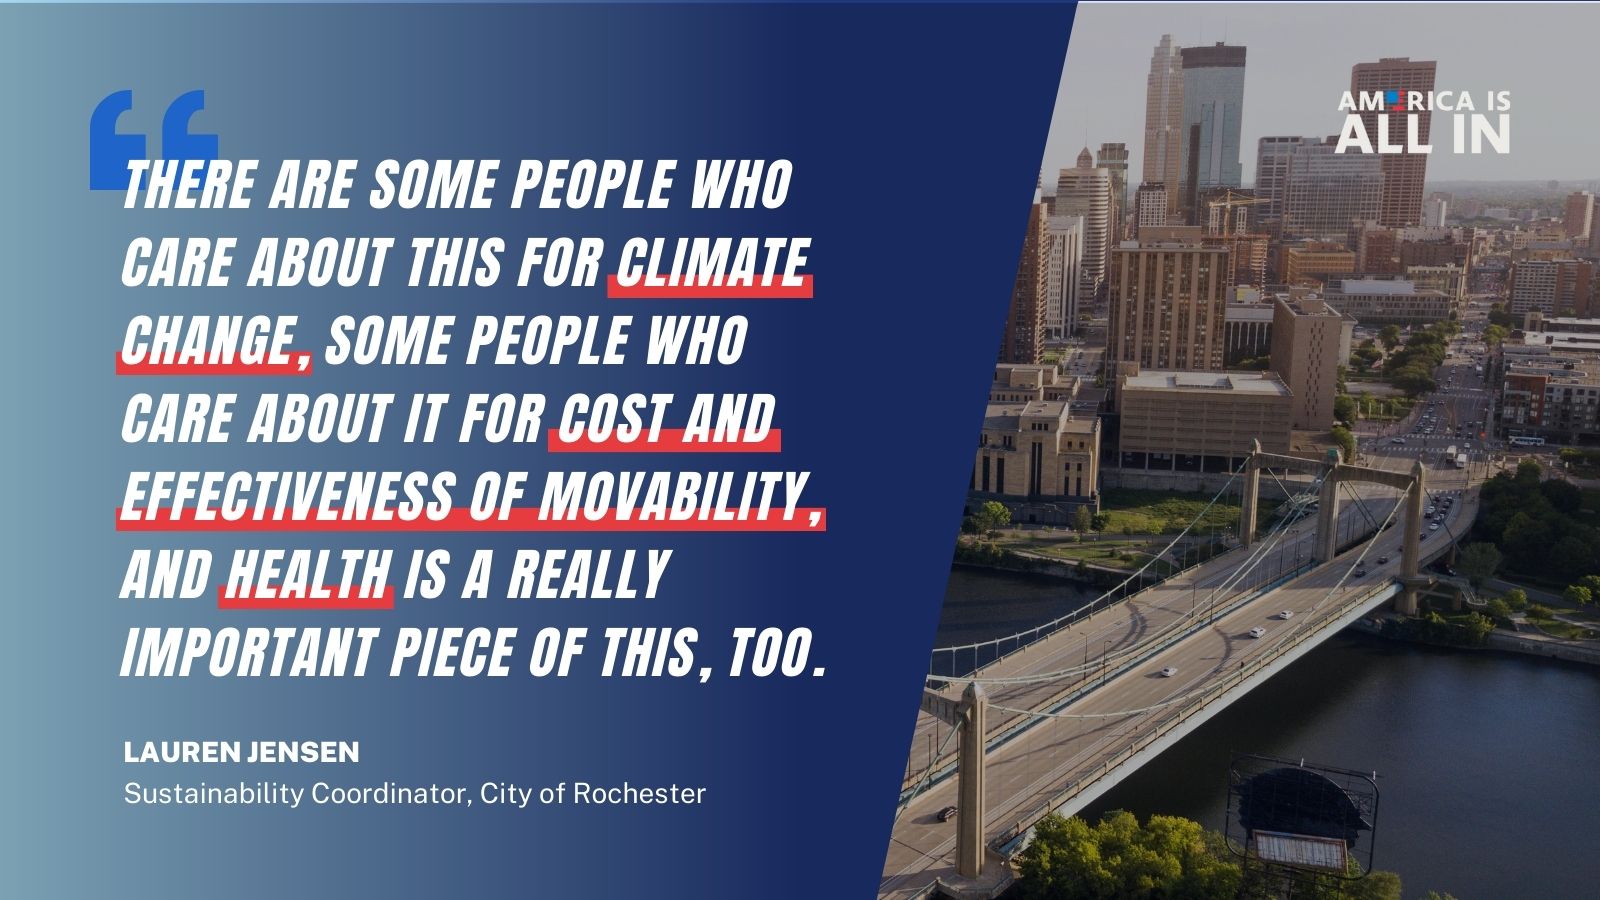 Image with the quote "there are some people who care about this for climate change, some people who care about it for cost and effectiveness of movability, and health is a really important piece of this, too" by Lauren Jenson, Sustainability Coordinator, City of Rochester